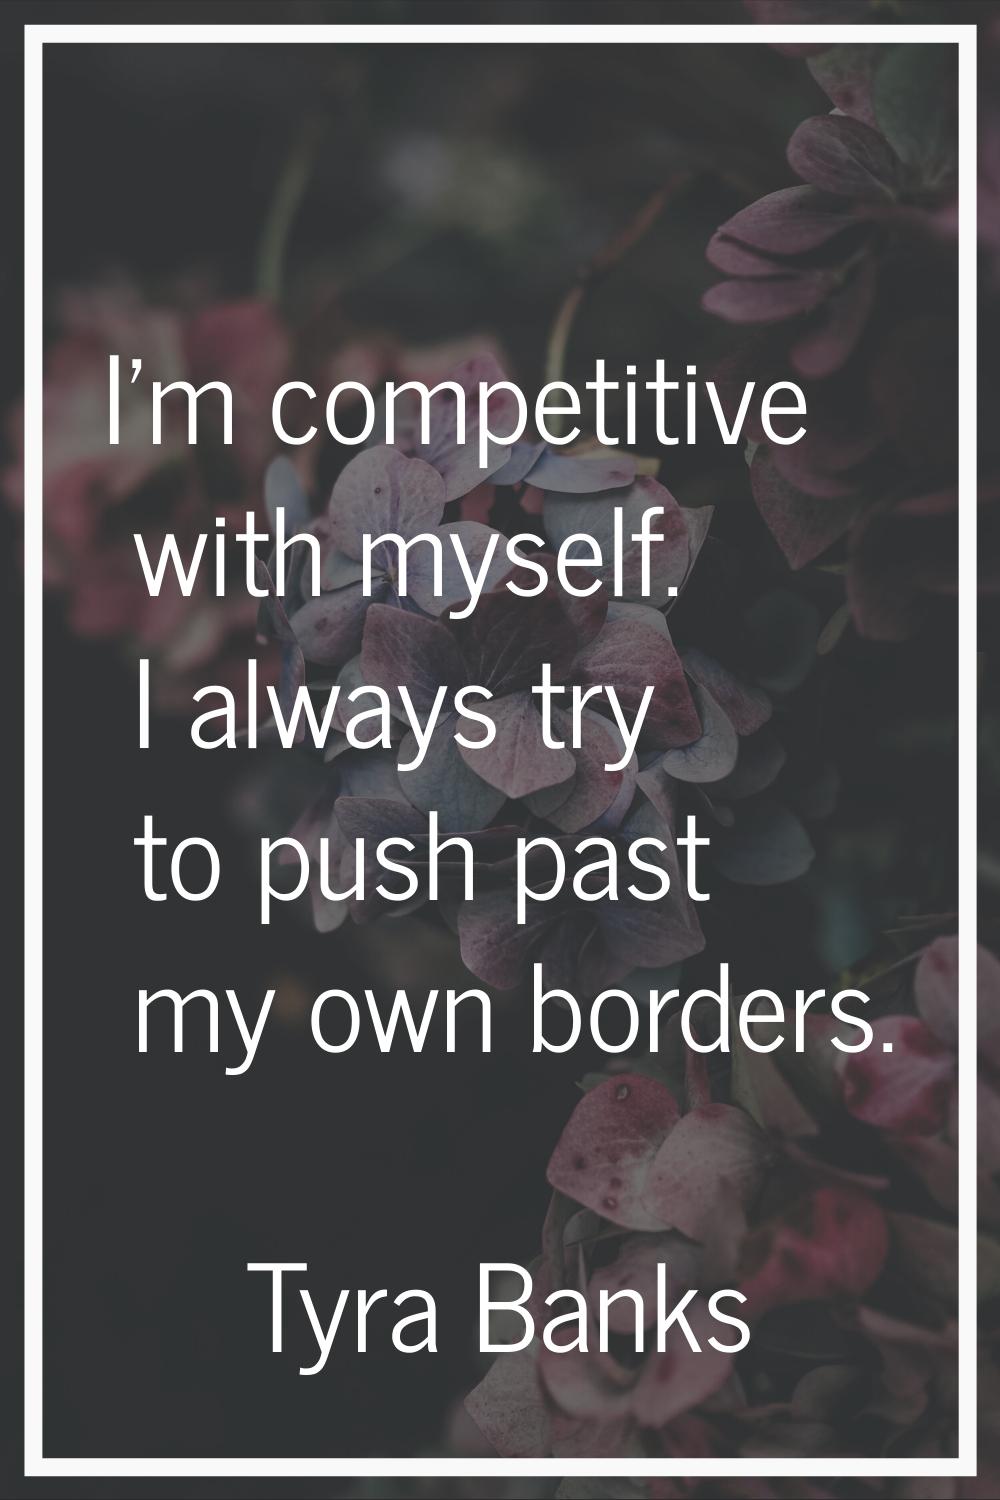 I'm competitive with myself. I always try to push past my own borders.